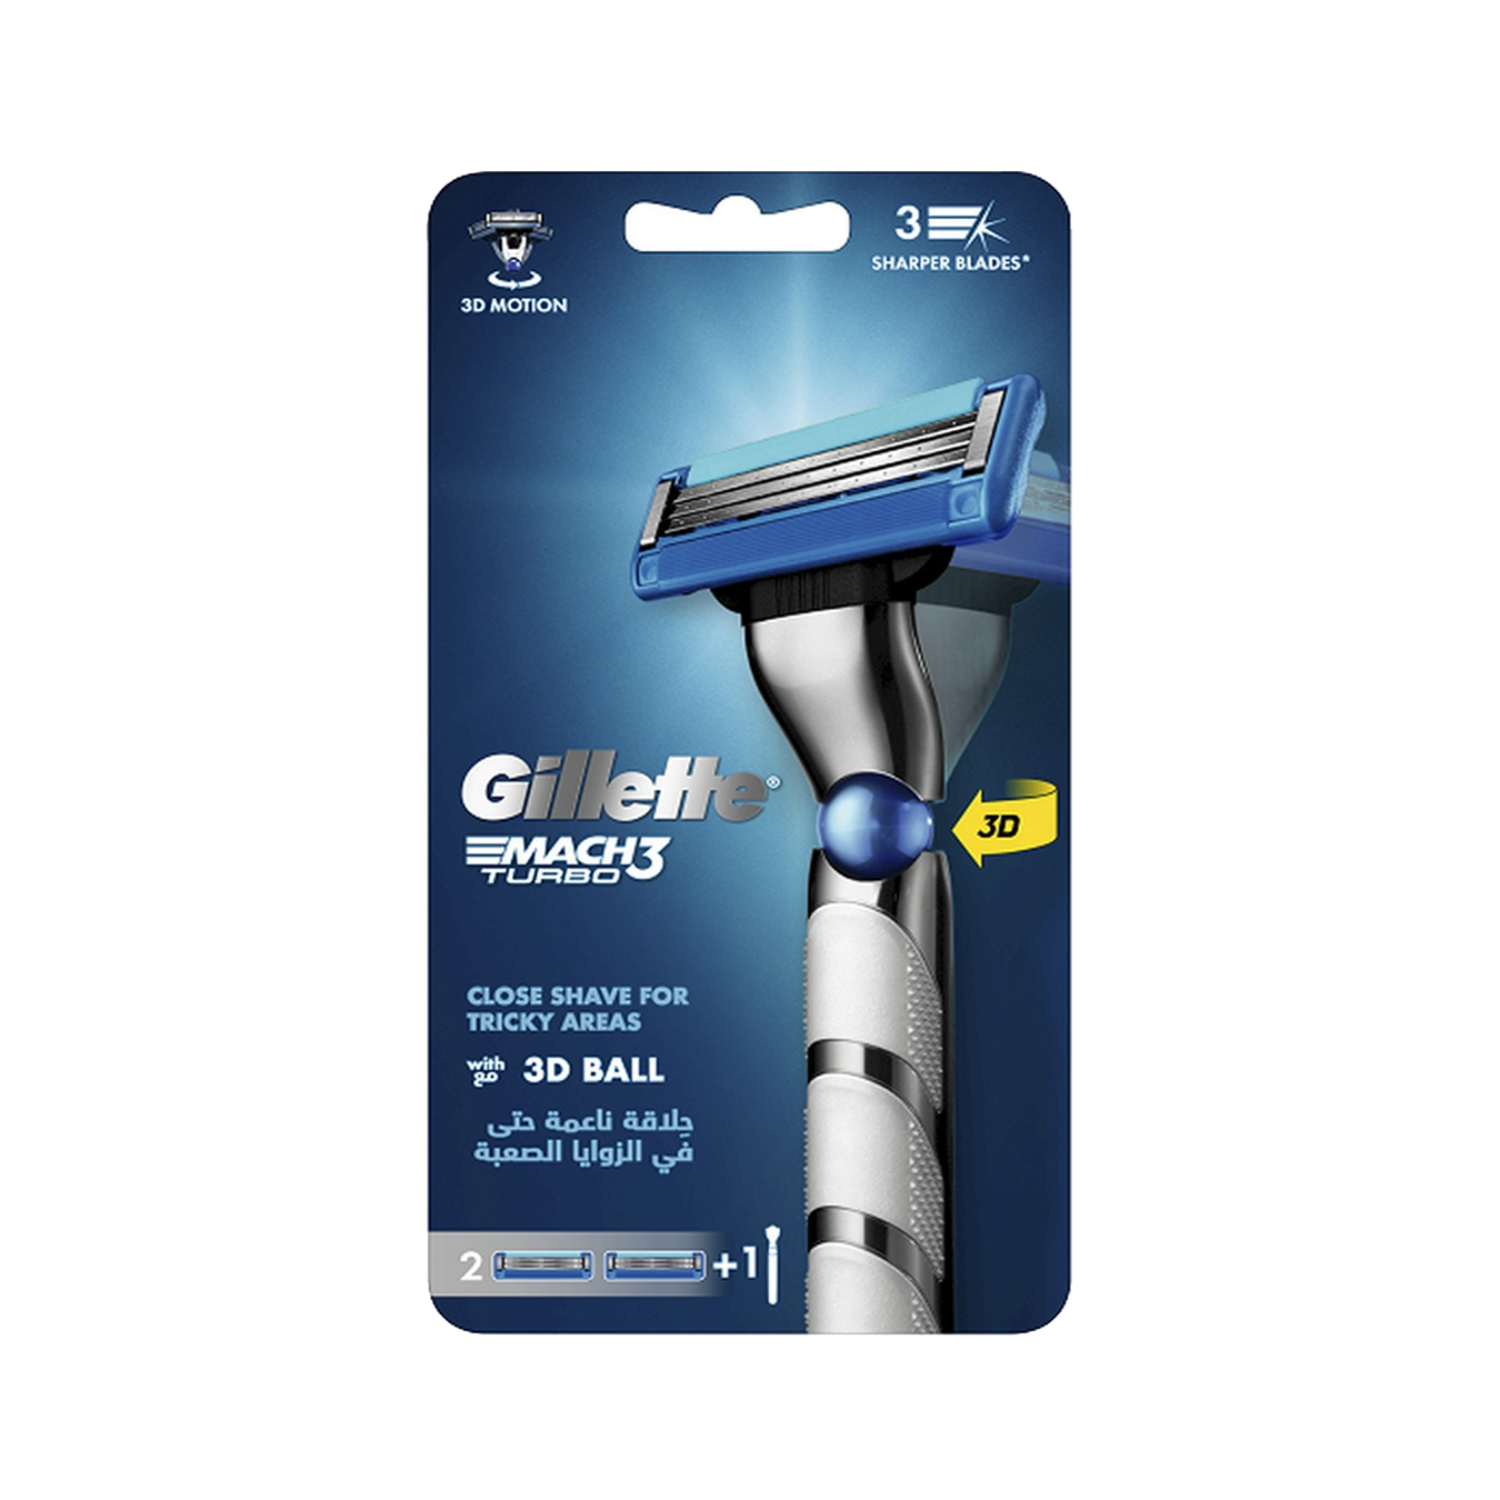 gillette-match-3-turbo-3d-razor-close-shave-for-tricky-area-2-1-china